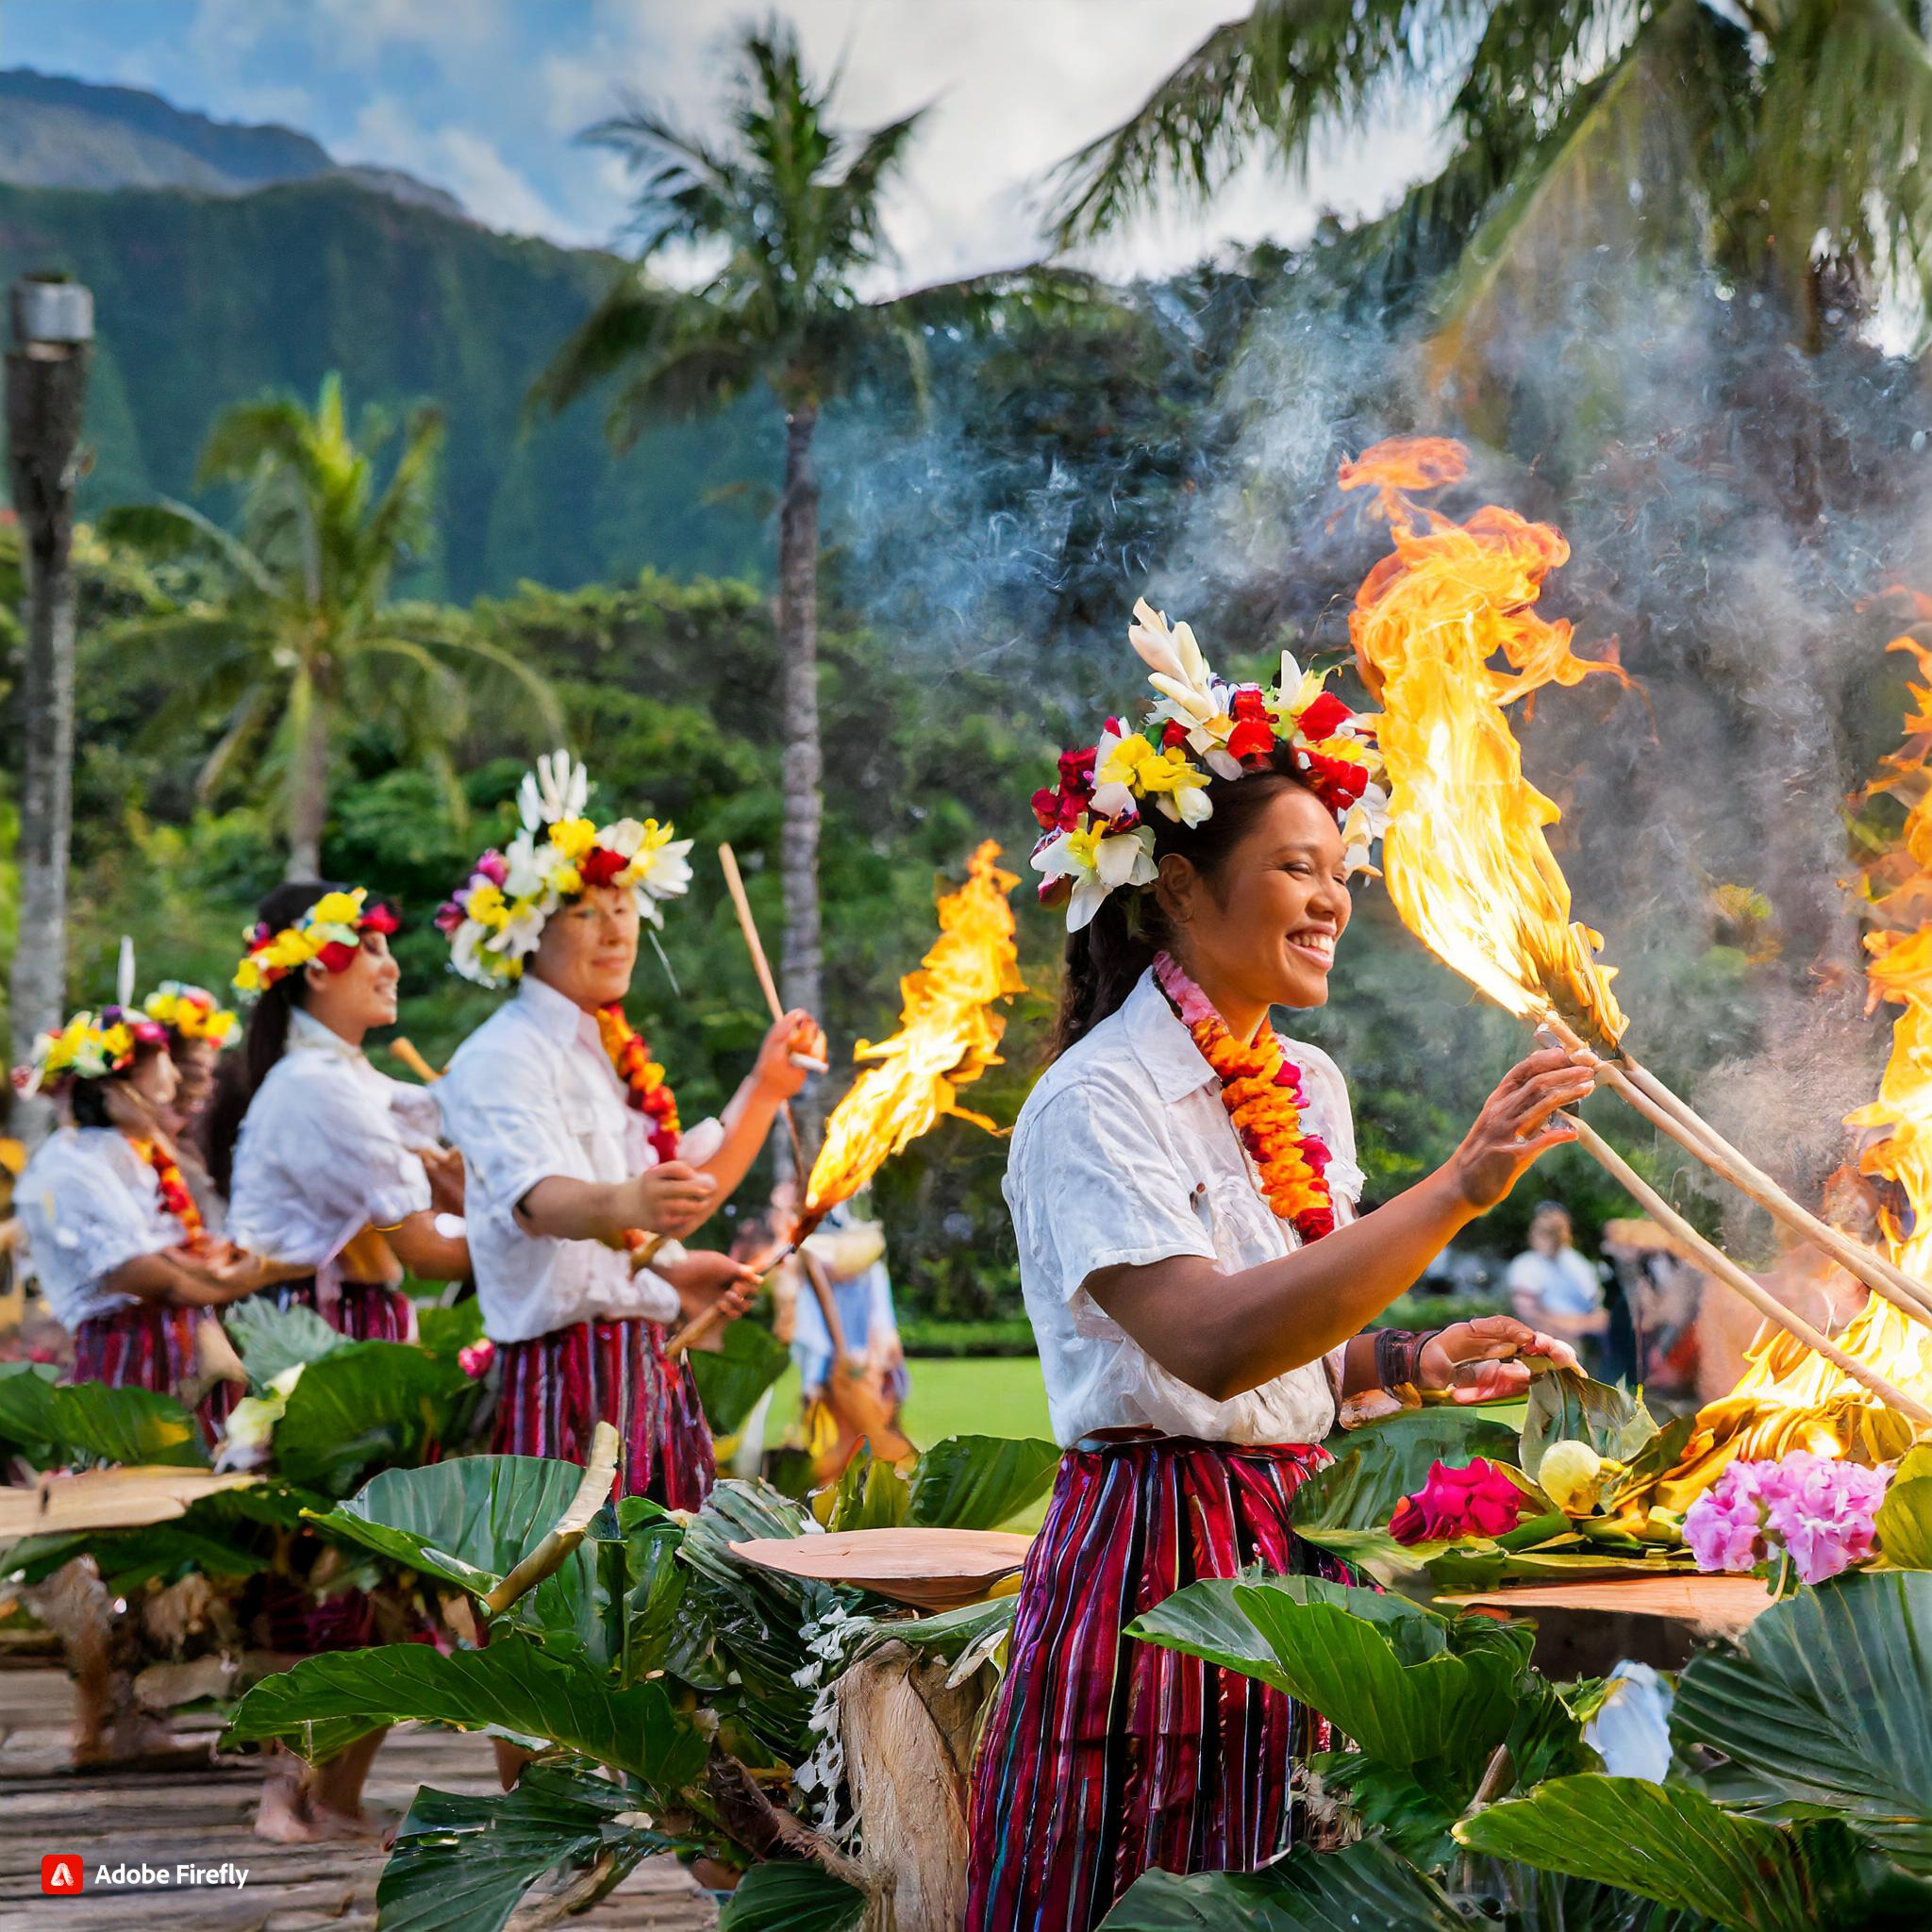 Firefly hawaiians performing for people in a luau with flowers in their hair and palyign with sticks.jpg